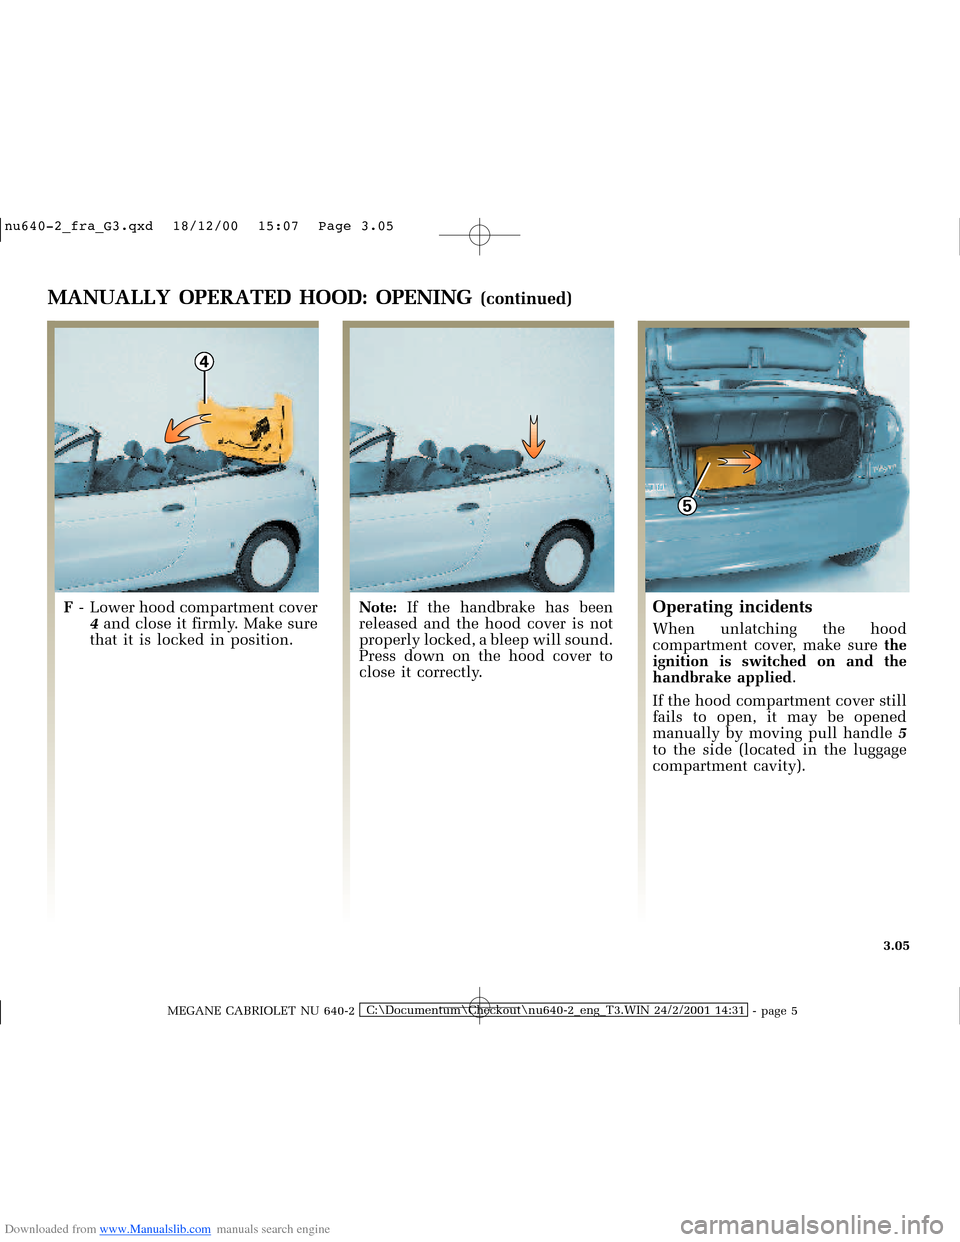 RENAULT MEGANE 2000 X64 / 1.G Owners Manual Downloaded from www.Manualslib.com manuals search engine 4
5
�Q�X������B�I�U�D�B�*���T�[�G� � ��������� � ������ � �3�D�J�H� ����
MEGANE CABRIOLET NU 640-2C:\Documentum\